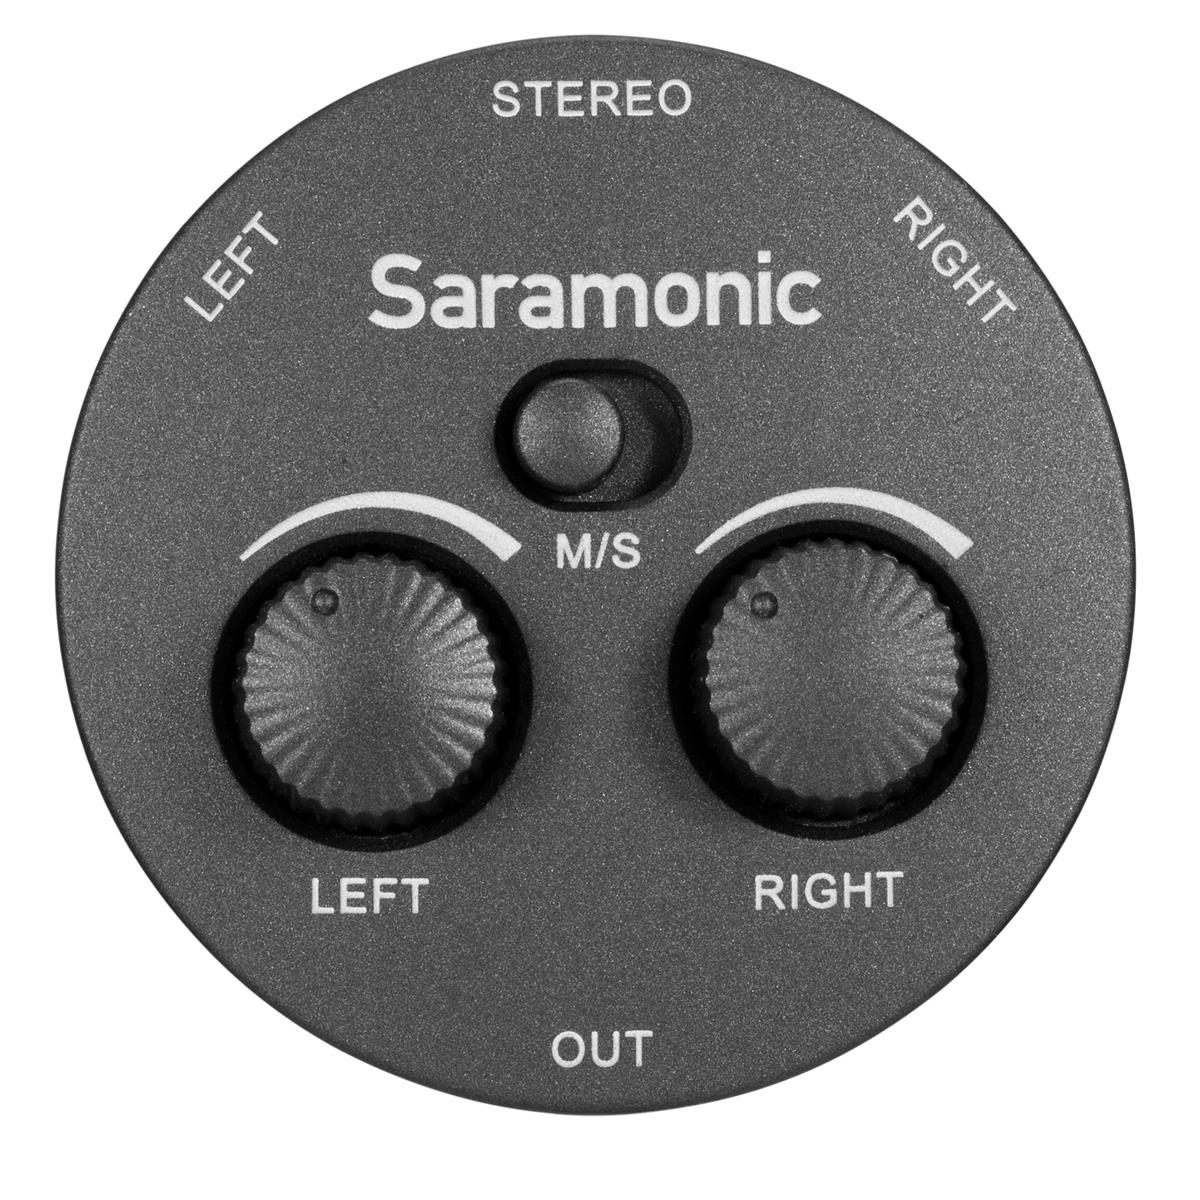 Saramonic AX1 Passive 2-Channel Audio Mixer for Cameras, Smartphones, Tablets, and Computers